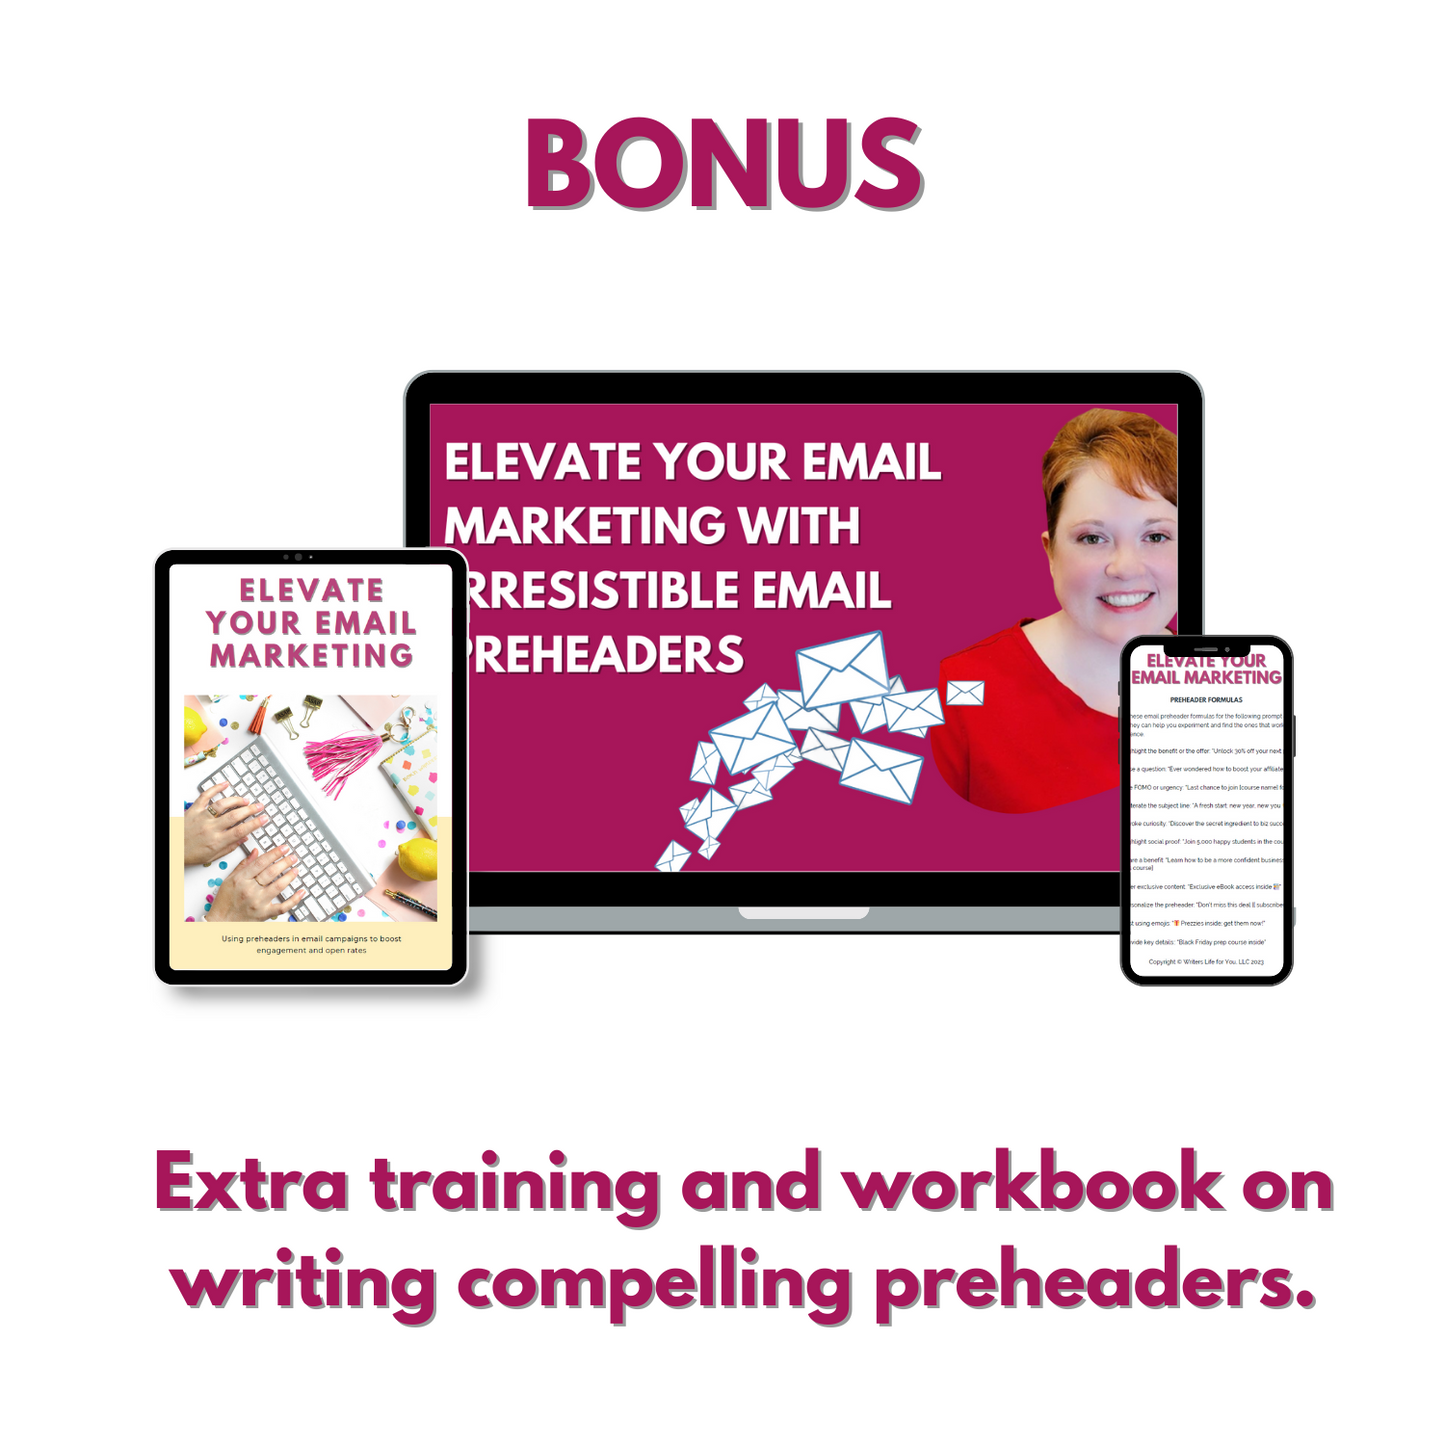 Image shows an advertisement for a bonus offer. It includes a tablet, a laptop, and a phone displaying content on email marketing with preheaders. The accompanying text reads: "BONUS. ELEVATE YOUR EMAIL MARKETING WITH IRRESISTIBLE EMAIL PREHEADERS. Extra training and workbook on writing compelling preheaders included with Headline & Subject Line Magic: Boost Clicks and Opens from ContentPreneur Biz Shop.